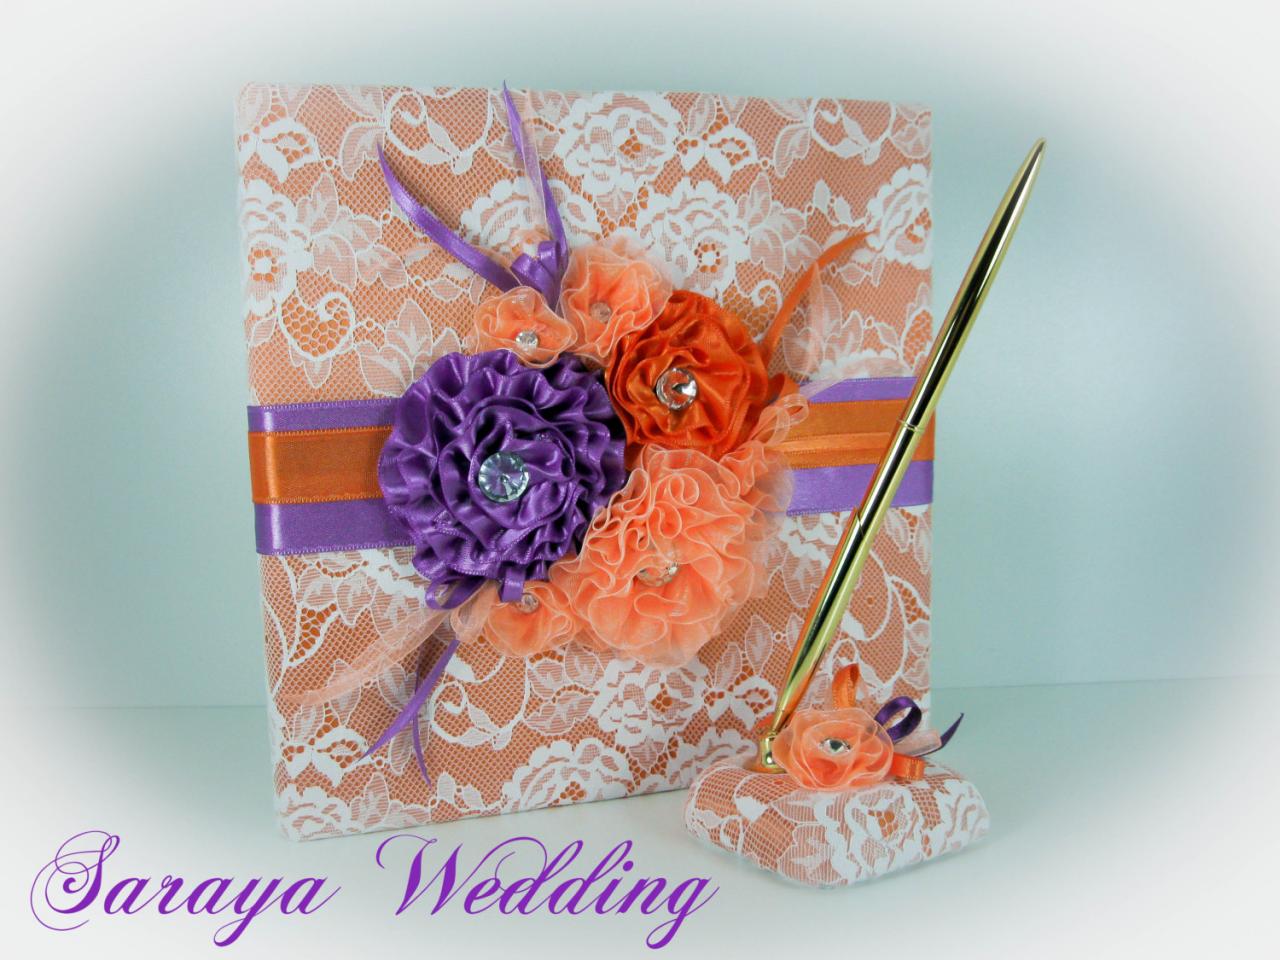 Wedding Guest Book With Orange And Purple Flowers, Wedding Guestbook, Wedding Sign In Book, Personalized Guest Book, Spring Wedding